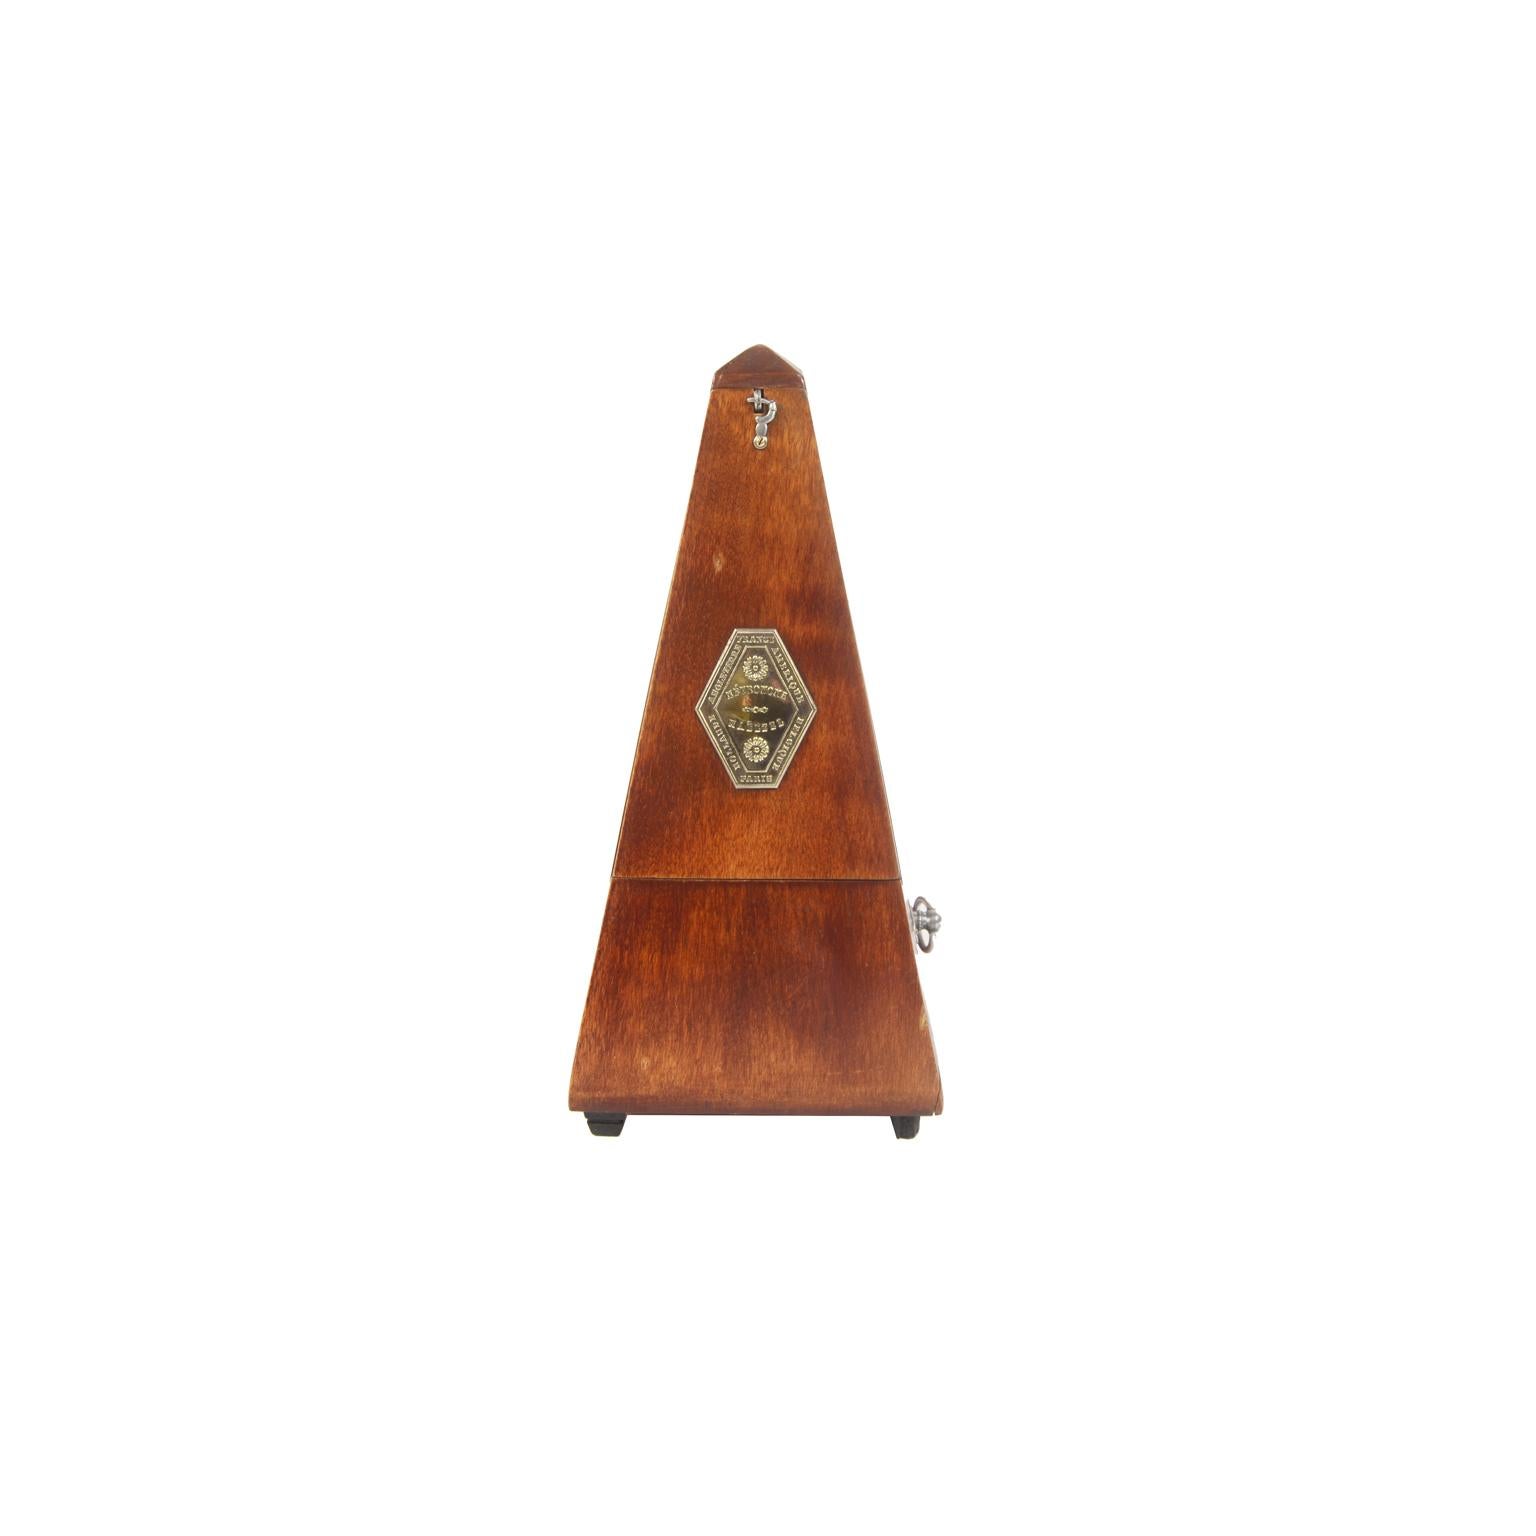 Metronome system Johan Maelzel (1772-1838) early 1900s. It is an instrument used to measure the tempo of music, the sound of the pendulum accurately signals the speed of execution. The instrument consists of a pendulum with counterweight that works